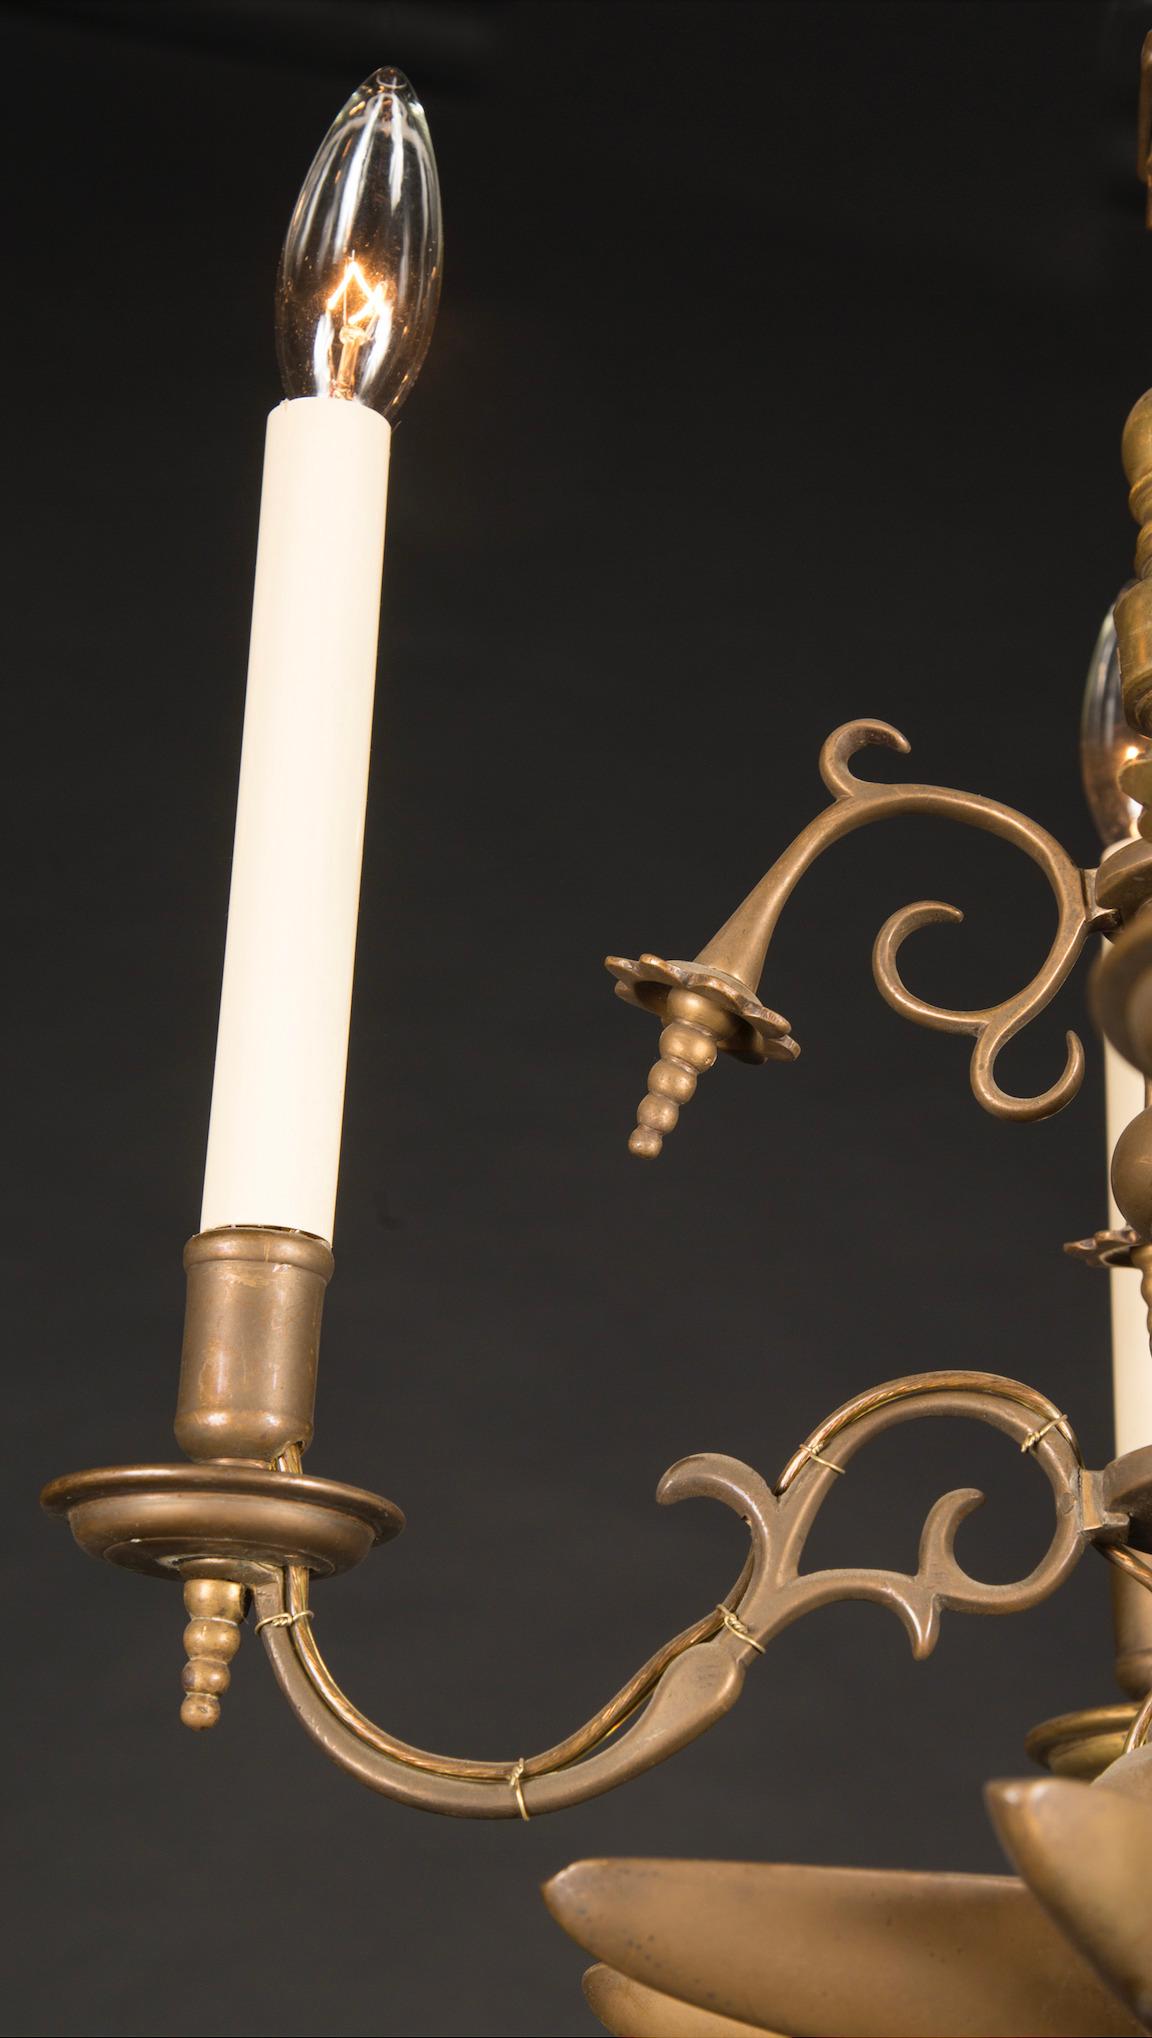 This unusual French brass chandelier dates back to the 19th century and features a myriad of unique details. Most notably, the top stem resembles a saw blade, reaching from the ceiling to the elements below. The bottom of the piece features an eight